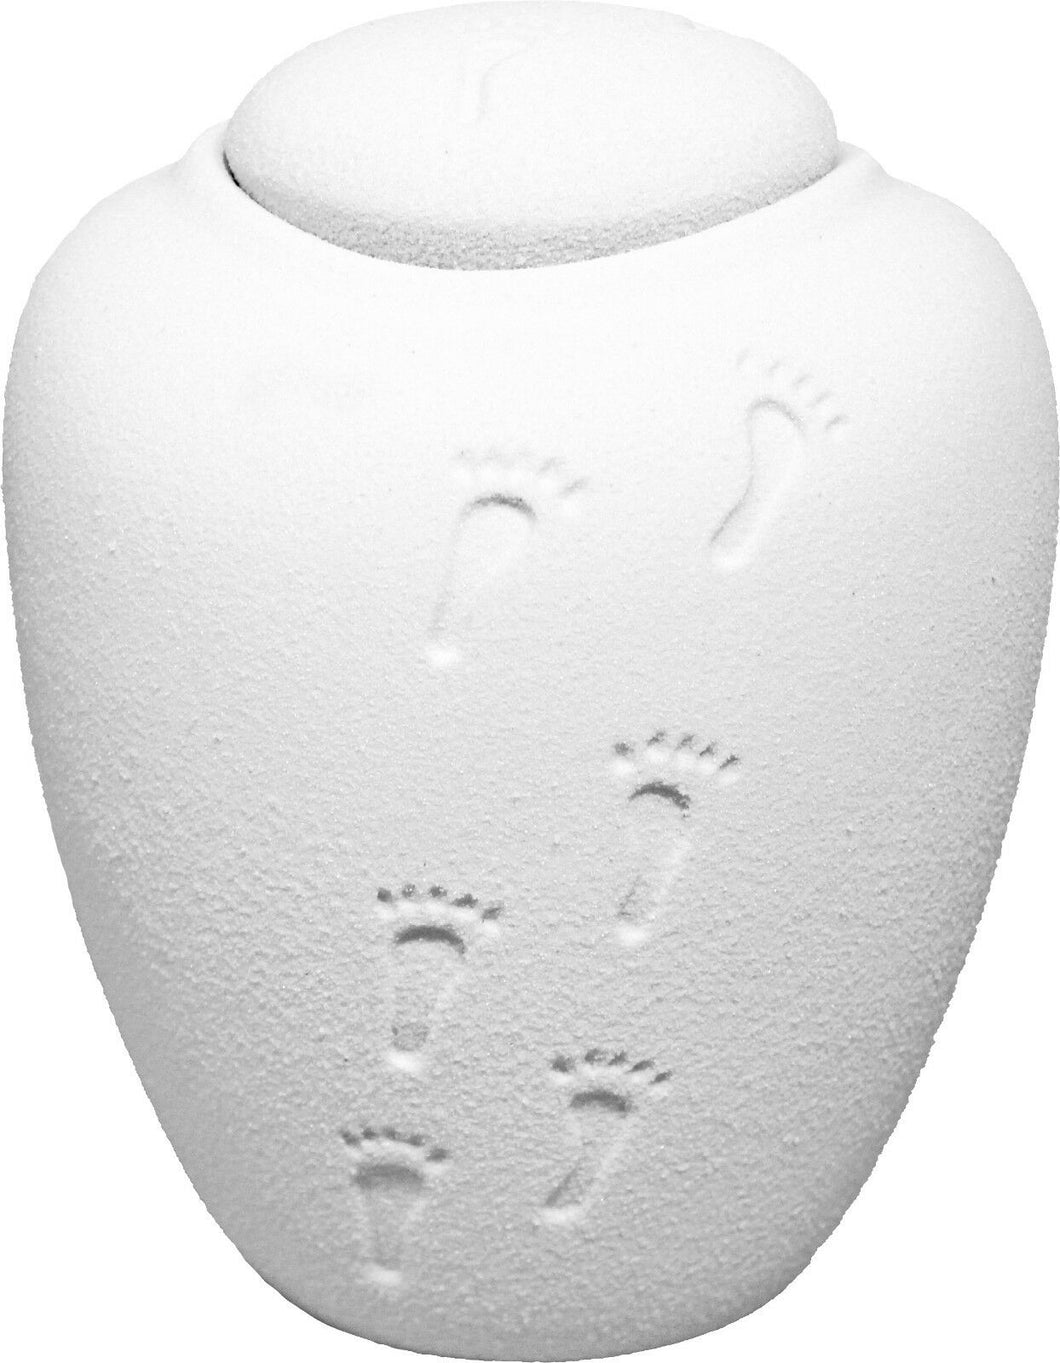 Adult Biodegradable, Oceane White Sand and Gelatin Funeral Cremation Urn